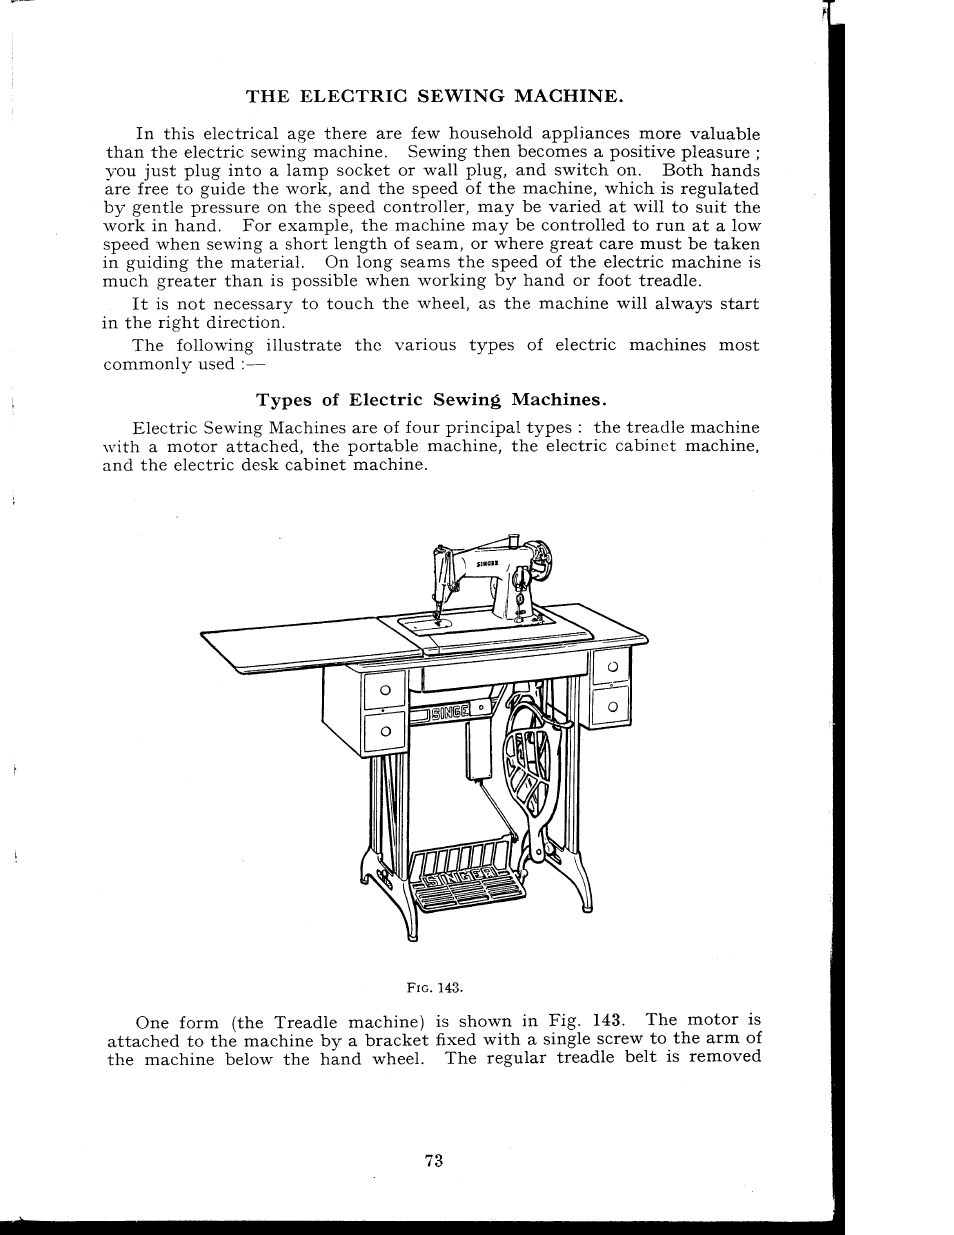 Types of electric sewing machines | SINGER 404K User Manual | Page 73 / 78